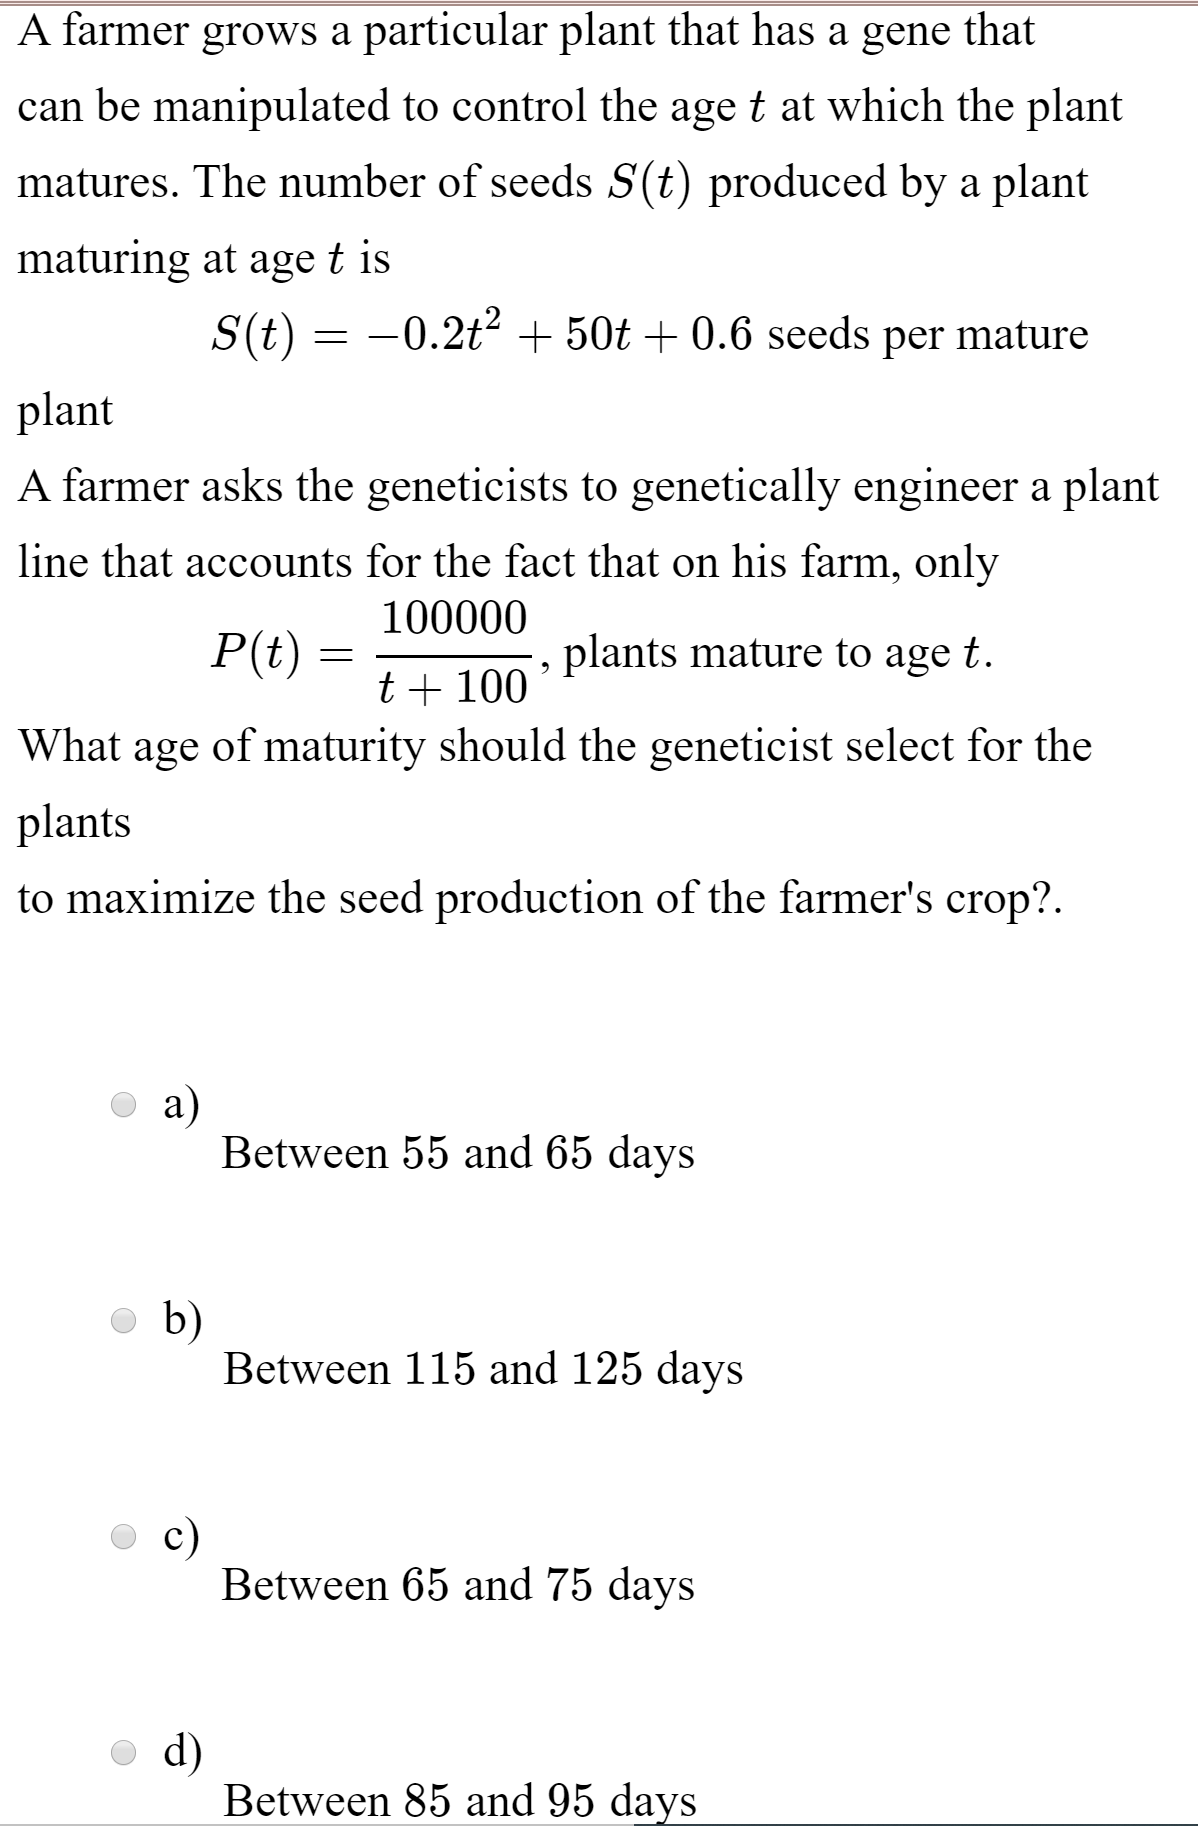 A farmer grows a particular plant that has a gene
that
can be manipulated to control the age t at which the plant
matures. The number of seeds S(t) produced by a plant
maturing at age t is
S(t) = -0.2t? + 50t + 0.6 seeds per mature
plant
A farmer asks the geneticists to genetically engineer a plant
line that accounts for the fact that on his farm, only
100000
P(t) =
plants mature to age t.
t+ 100
What age of maturity should the geneticist select for the
plants
to maximize the seed production of the farmer's crop?.
a)
Between 55 and 65 days
b)
Between 115 and 125 days
c)
Between 65 and 75 days
d)
Between 85 and 95 days
